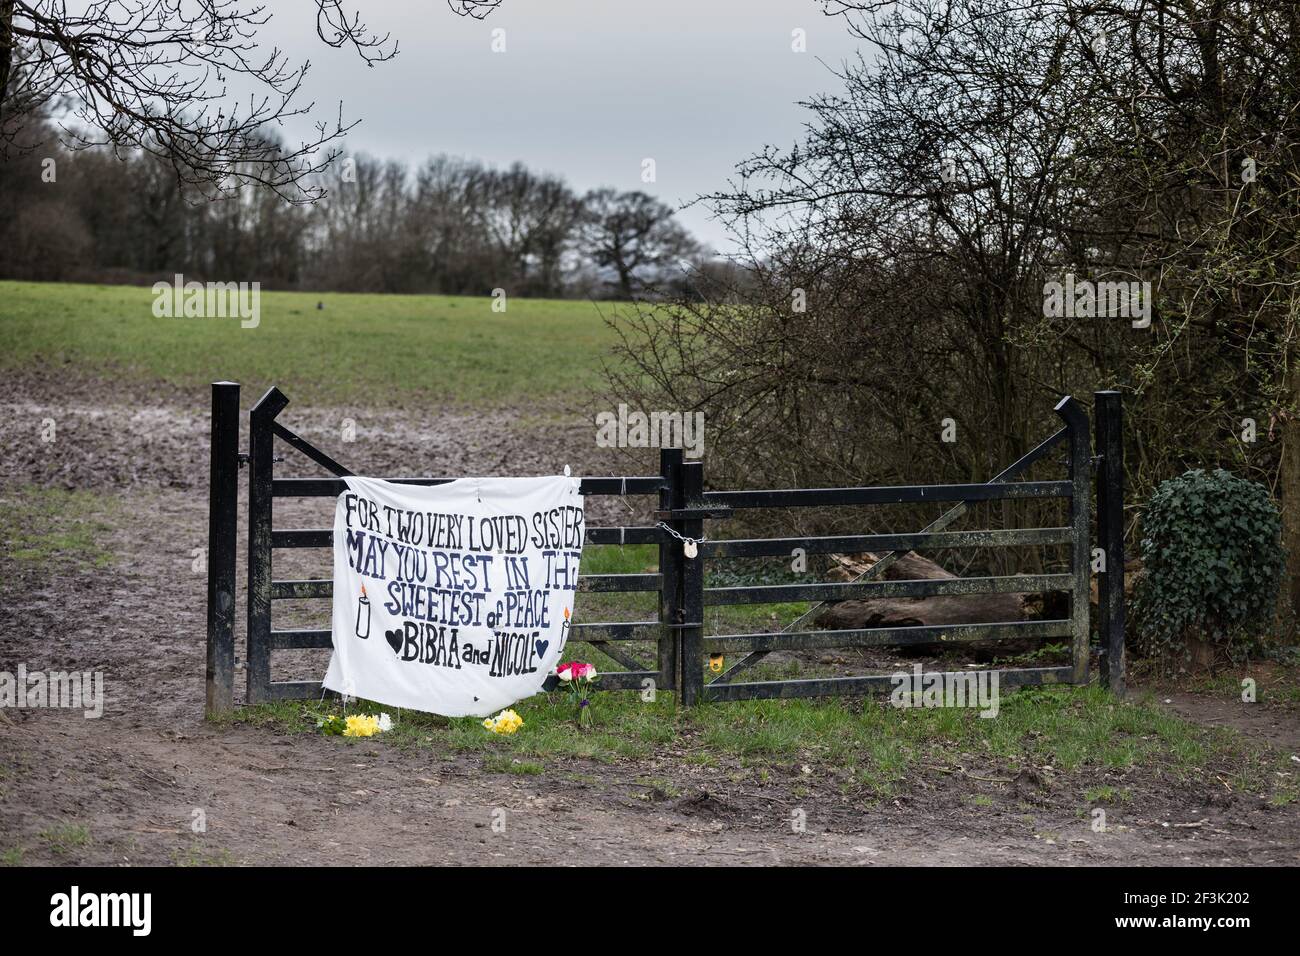 Fryent Park, Wembley Park, UK. 17th March 2021.  As we focus on the murder of Sarah Everard, Alina Wahab and Fawwaz Noibi have set up a memorial to two sisters murdered last June.   The bodies of Nicole Smallman, 27, and Bibaa Henry, 46, were found in Fryent Park in Wembley on 7 June, two days after they went missing following a birthday party in the park.   13 Metropolitan Police officers were suspended for sharing inappropriate images, including selfies of themselves with the sisters bodies, via WhatsApp, but have still not been charged.  Amanda Rose/Alamy Live News Stock Photo